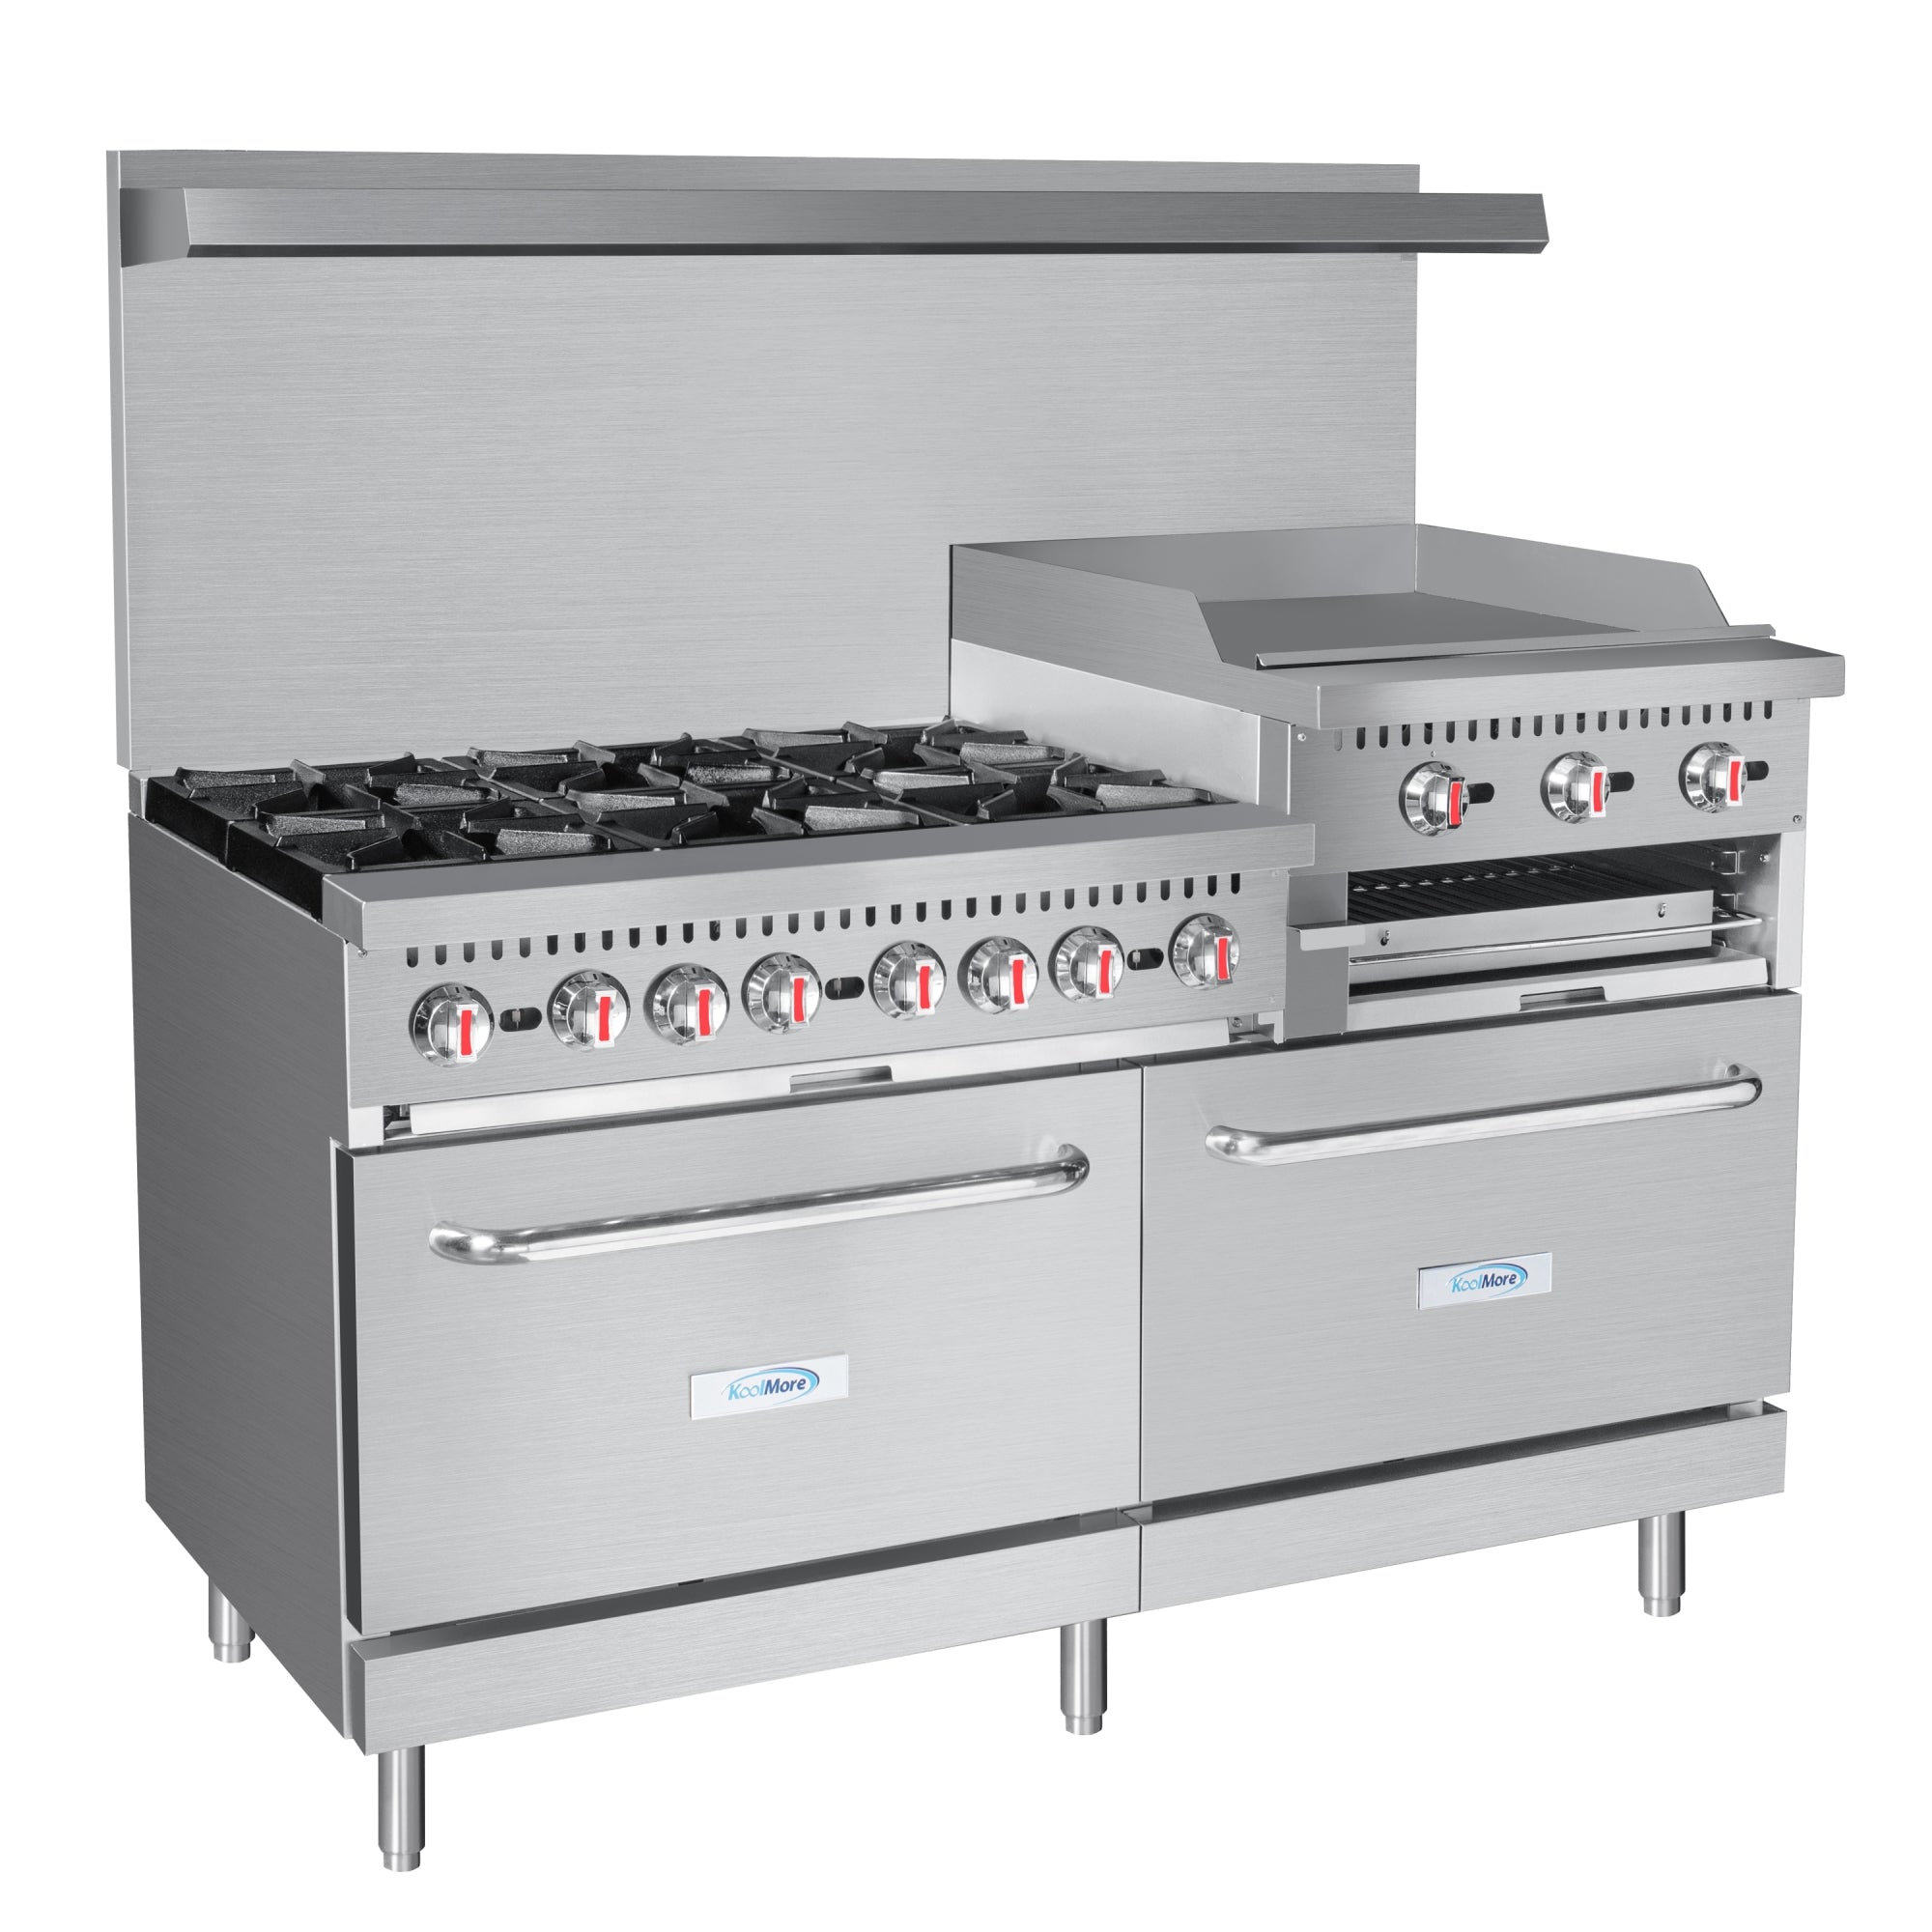 36 in. 2 Burner Commercial Natural GAS Range with 24 in. Griddle in Stainless-Steel (KM-CRG36-NG) Koolmore